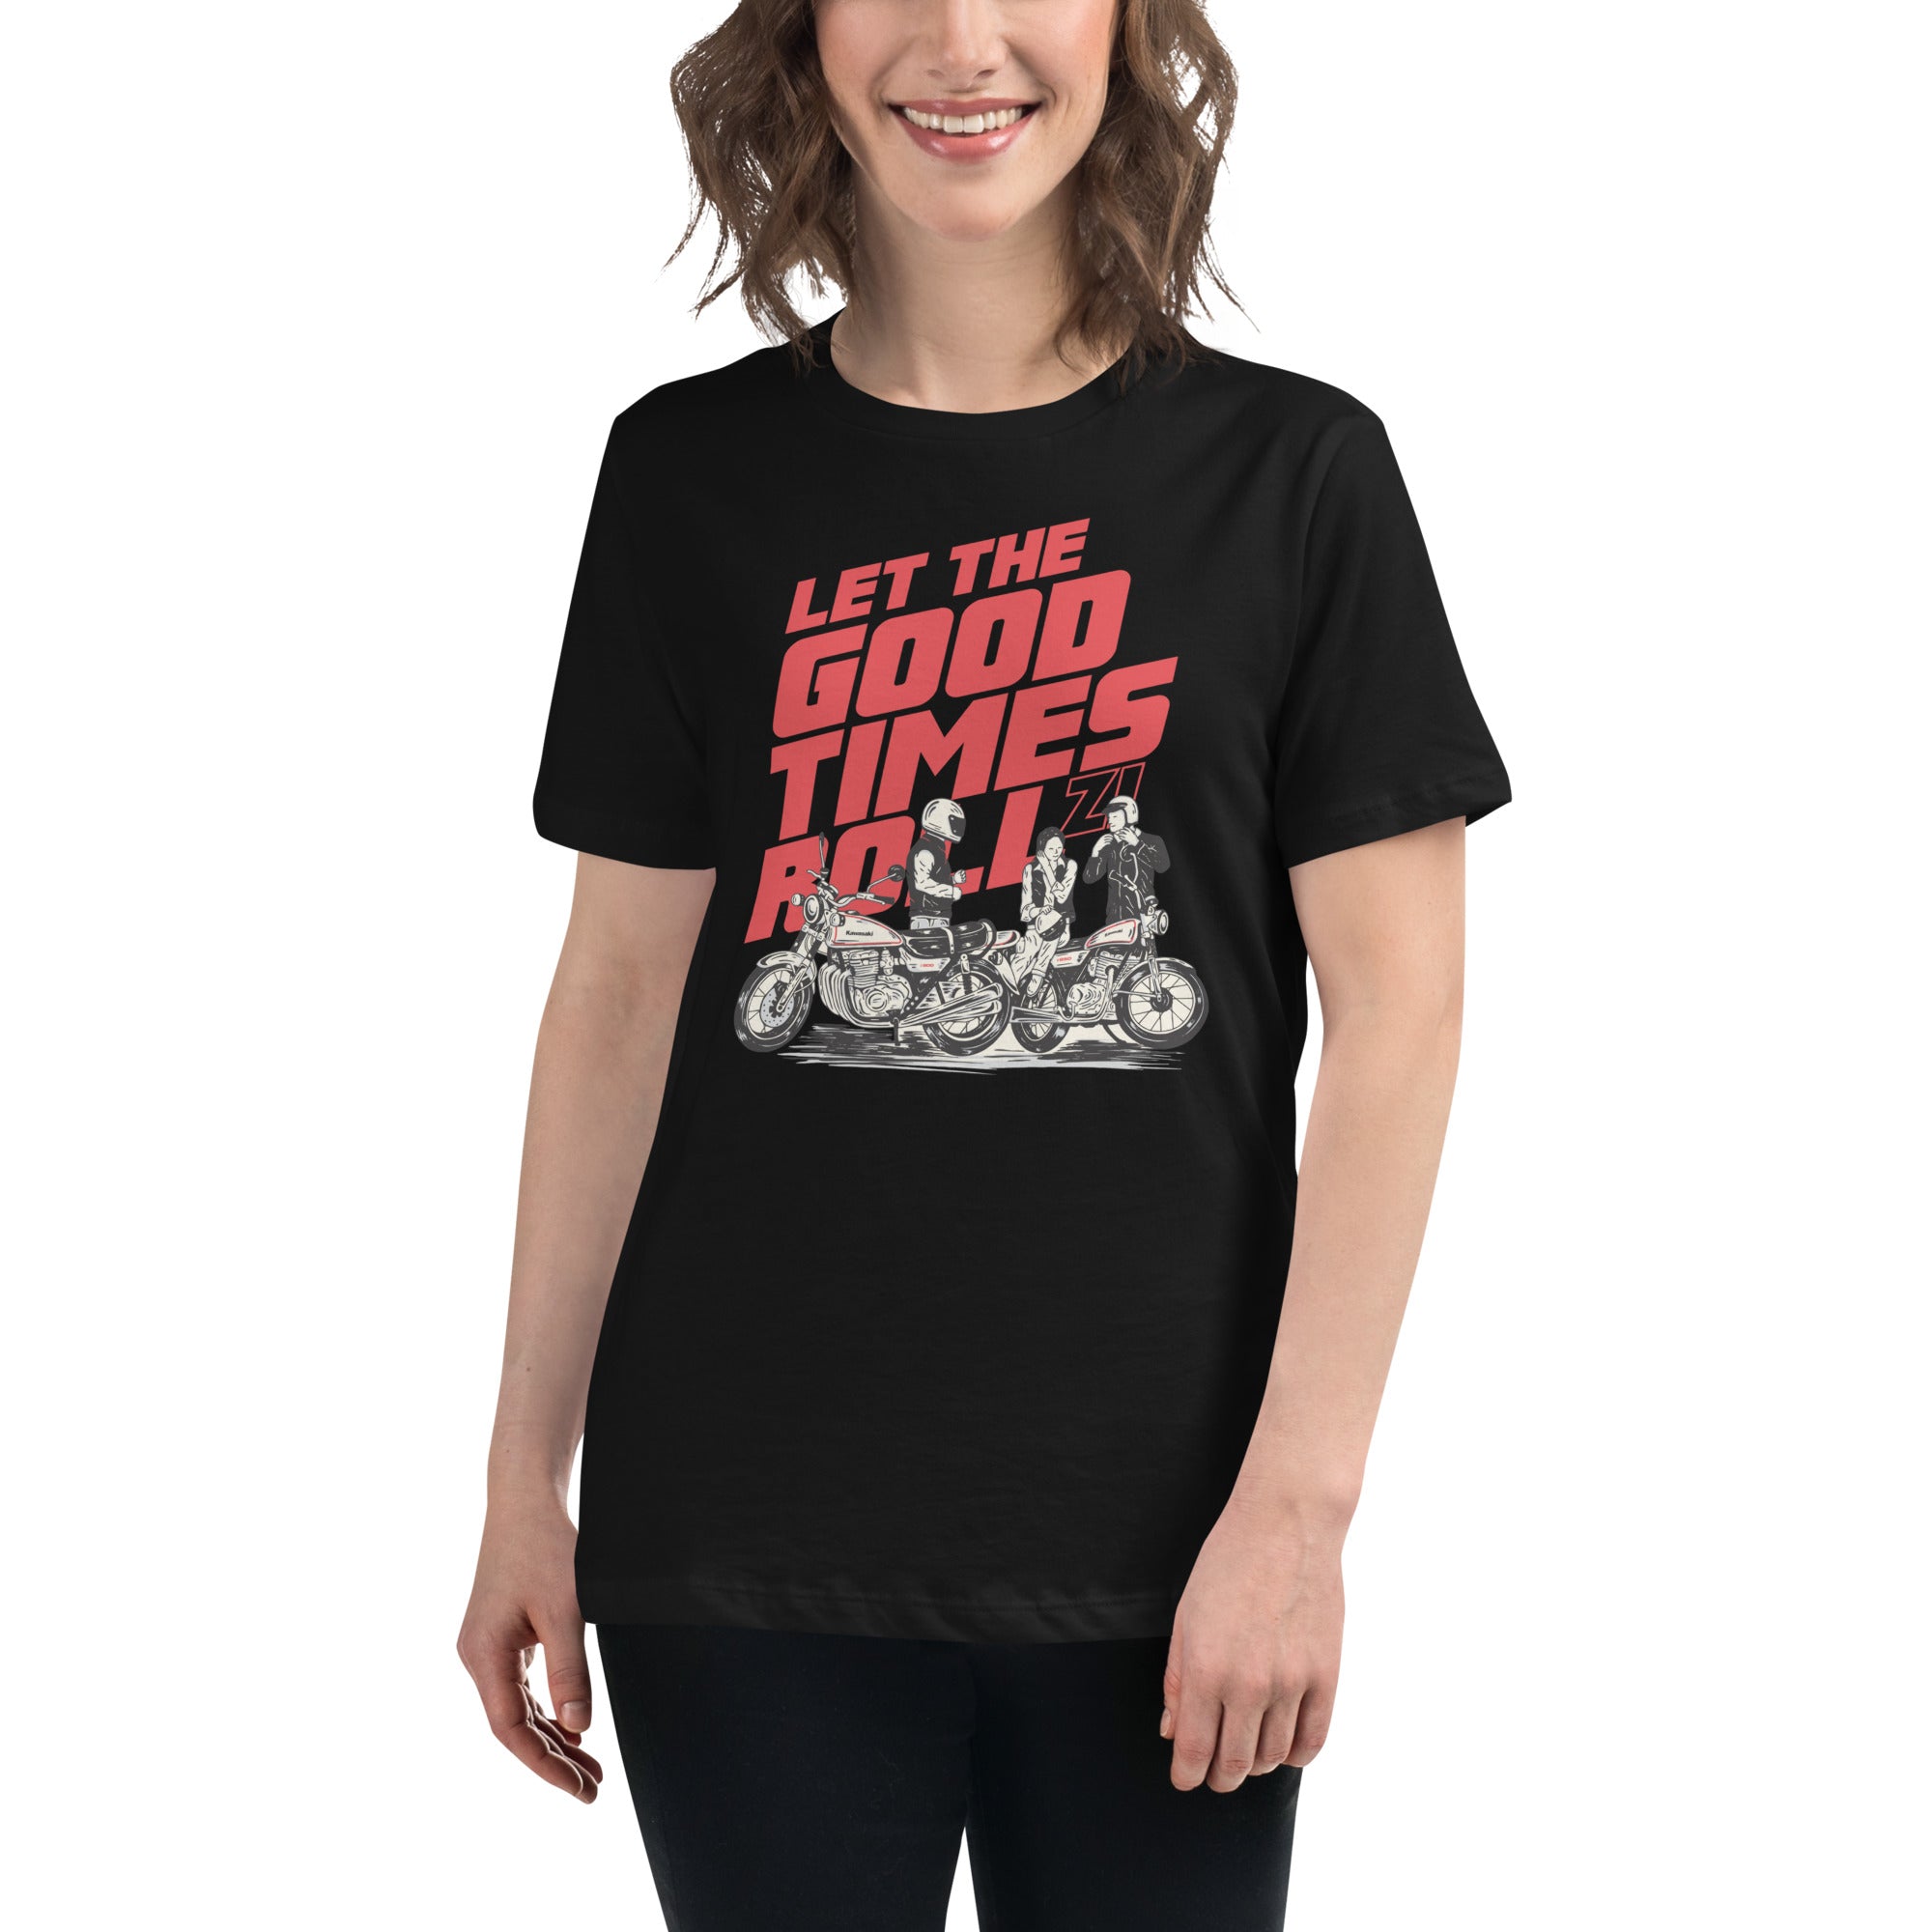 Let The Good Times Roll T-Shirt - Women's